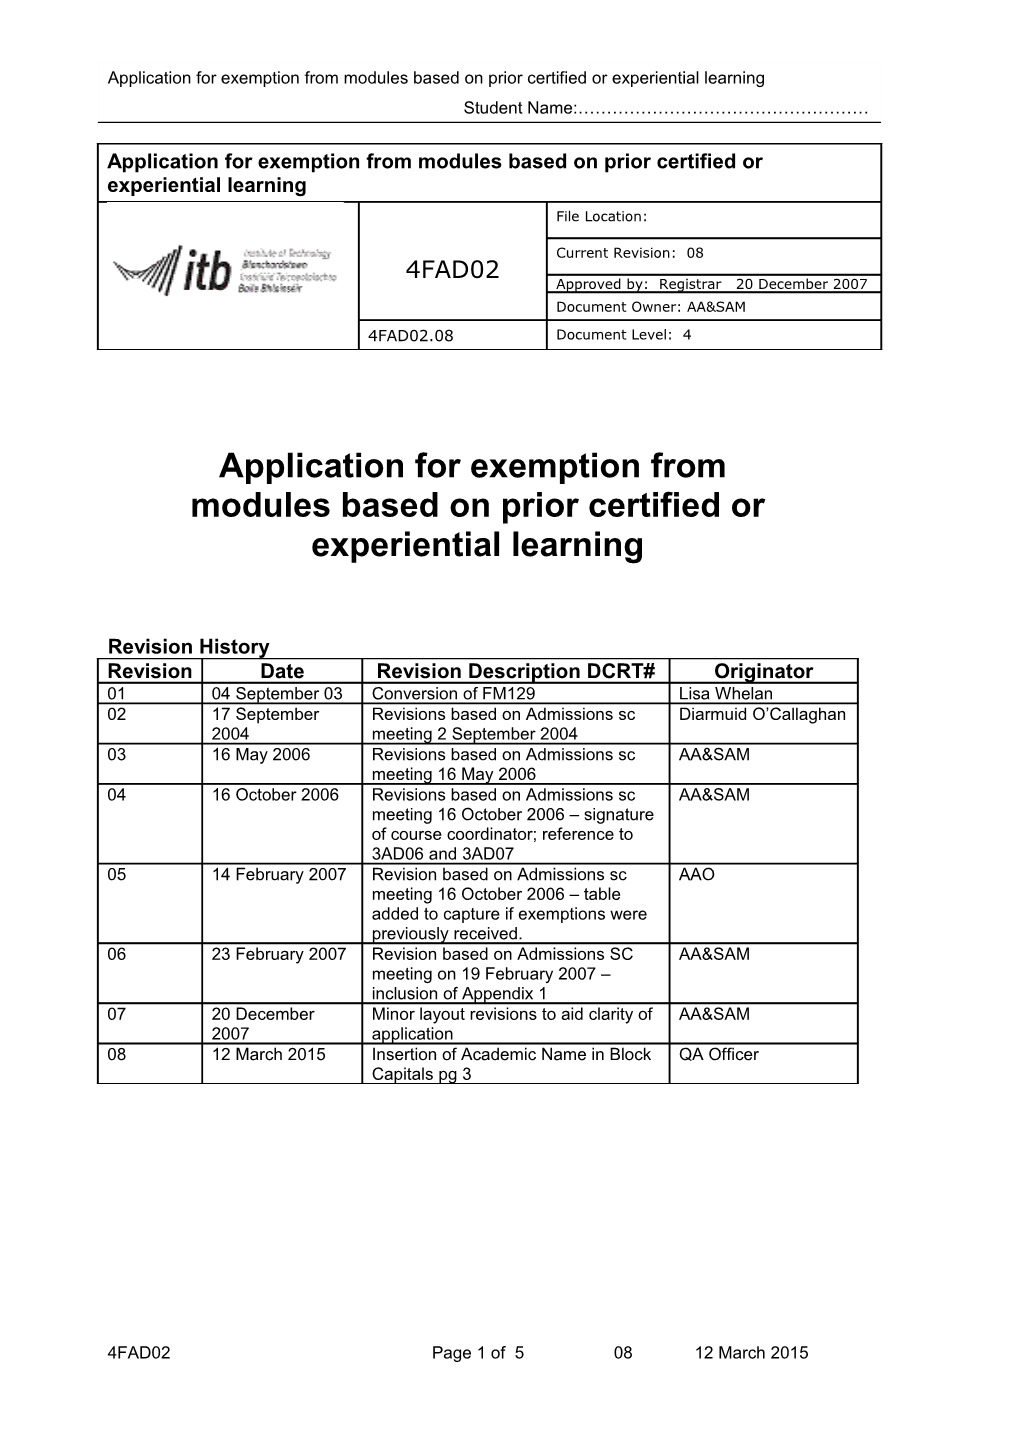 Application for Exemption from Modules Based on Prior Certified Or Experiential Learning